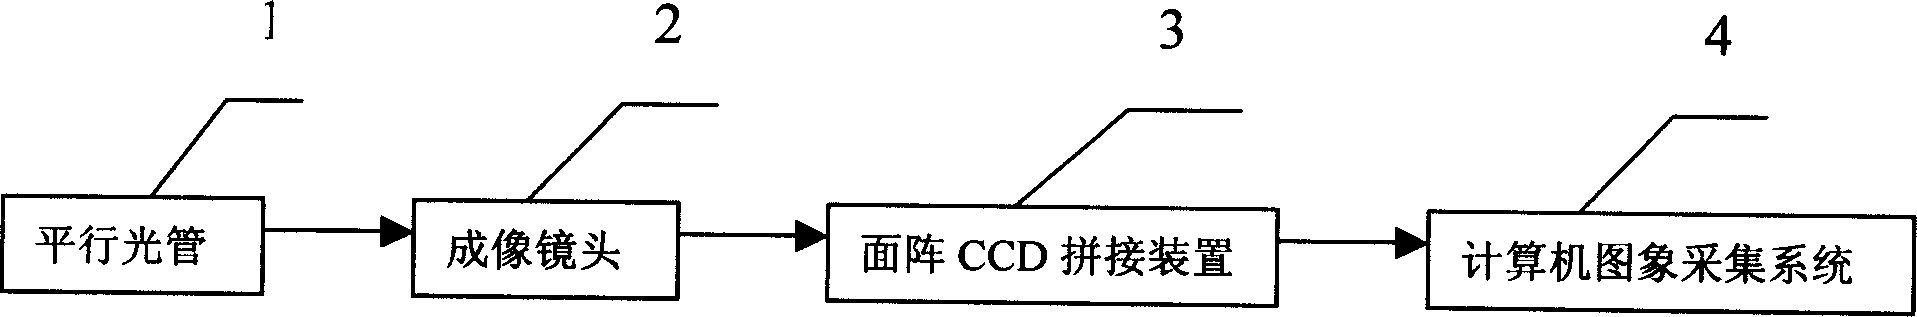 CCD splicing system